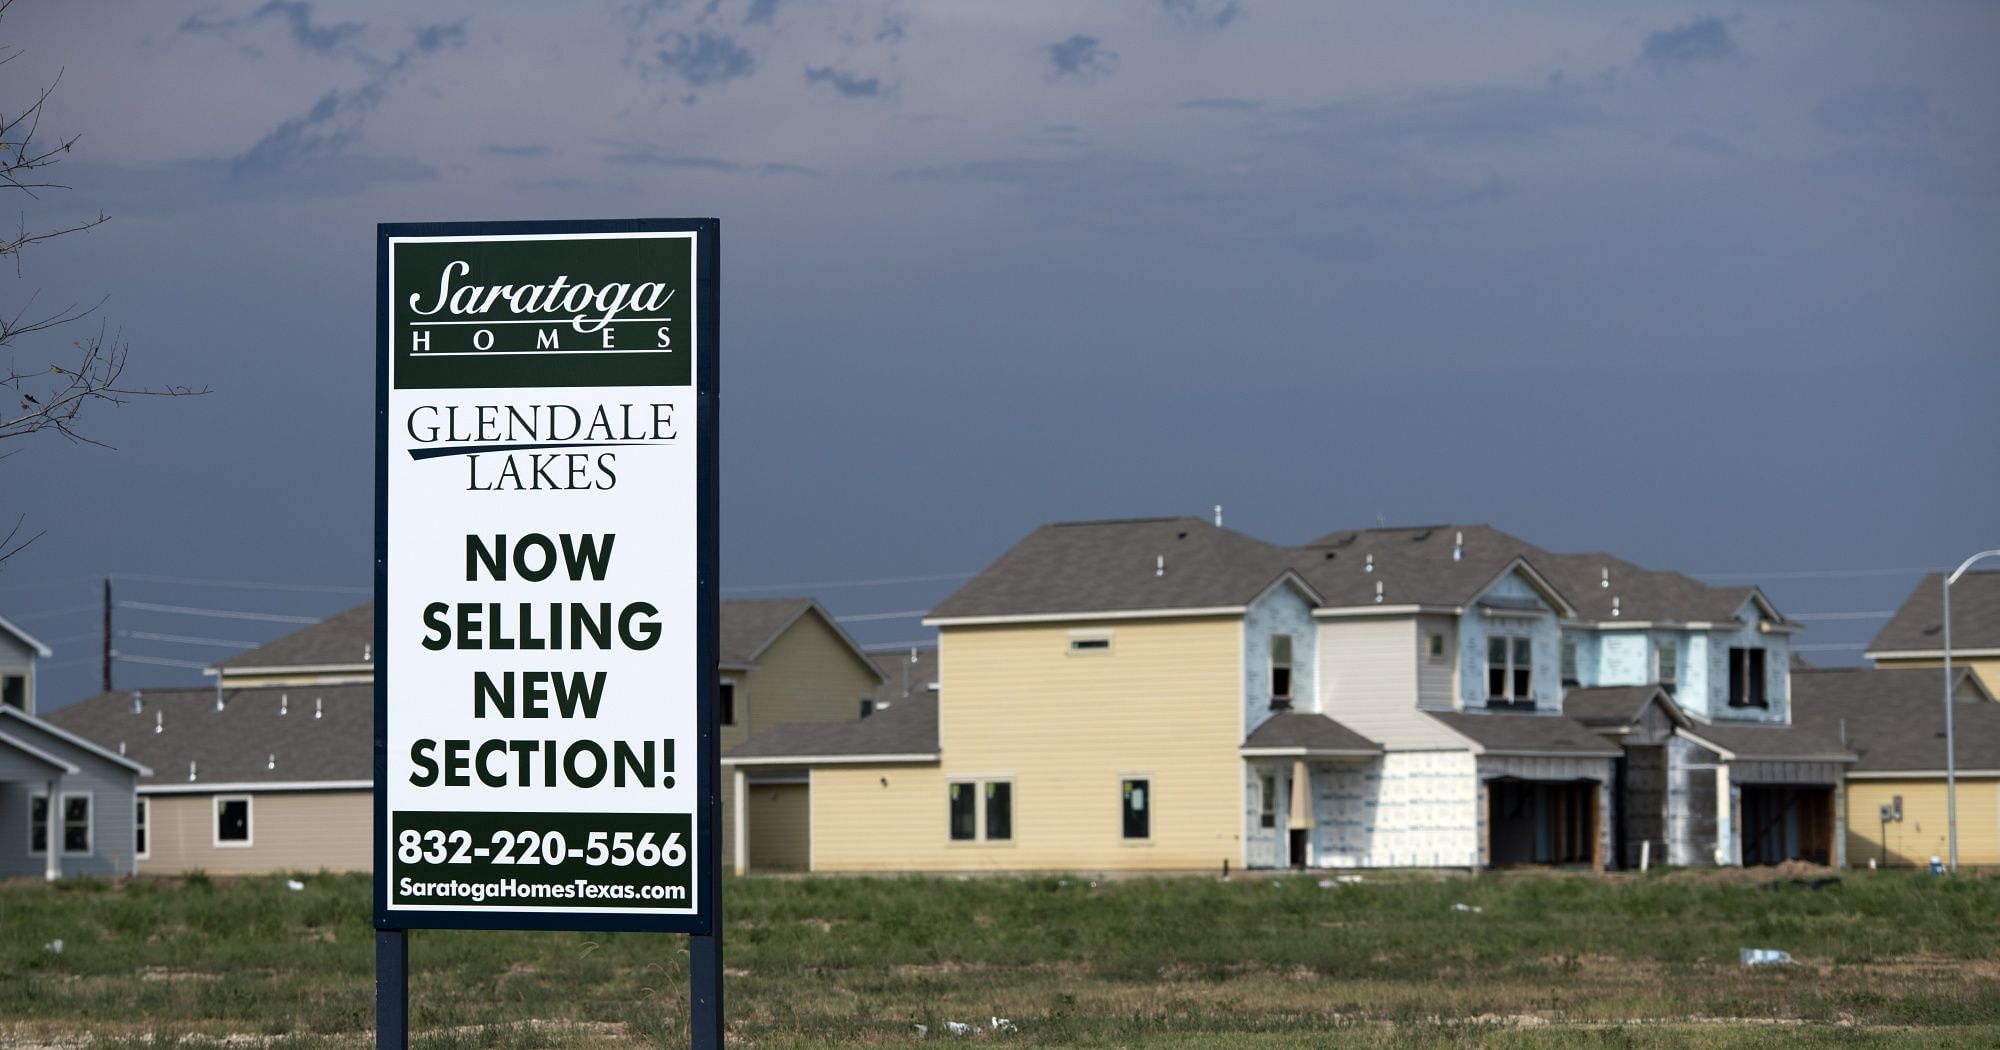 U.S. Pending Home Sales Drop To Lowest Since Start Of The Pandemic